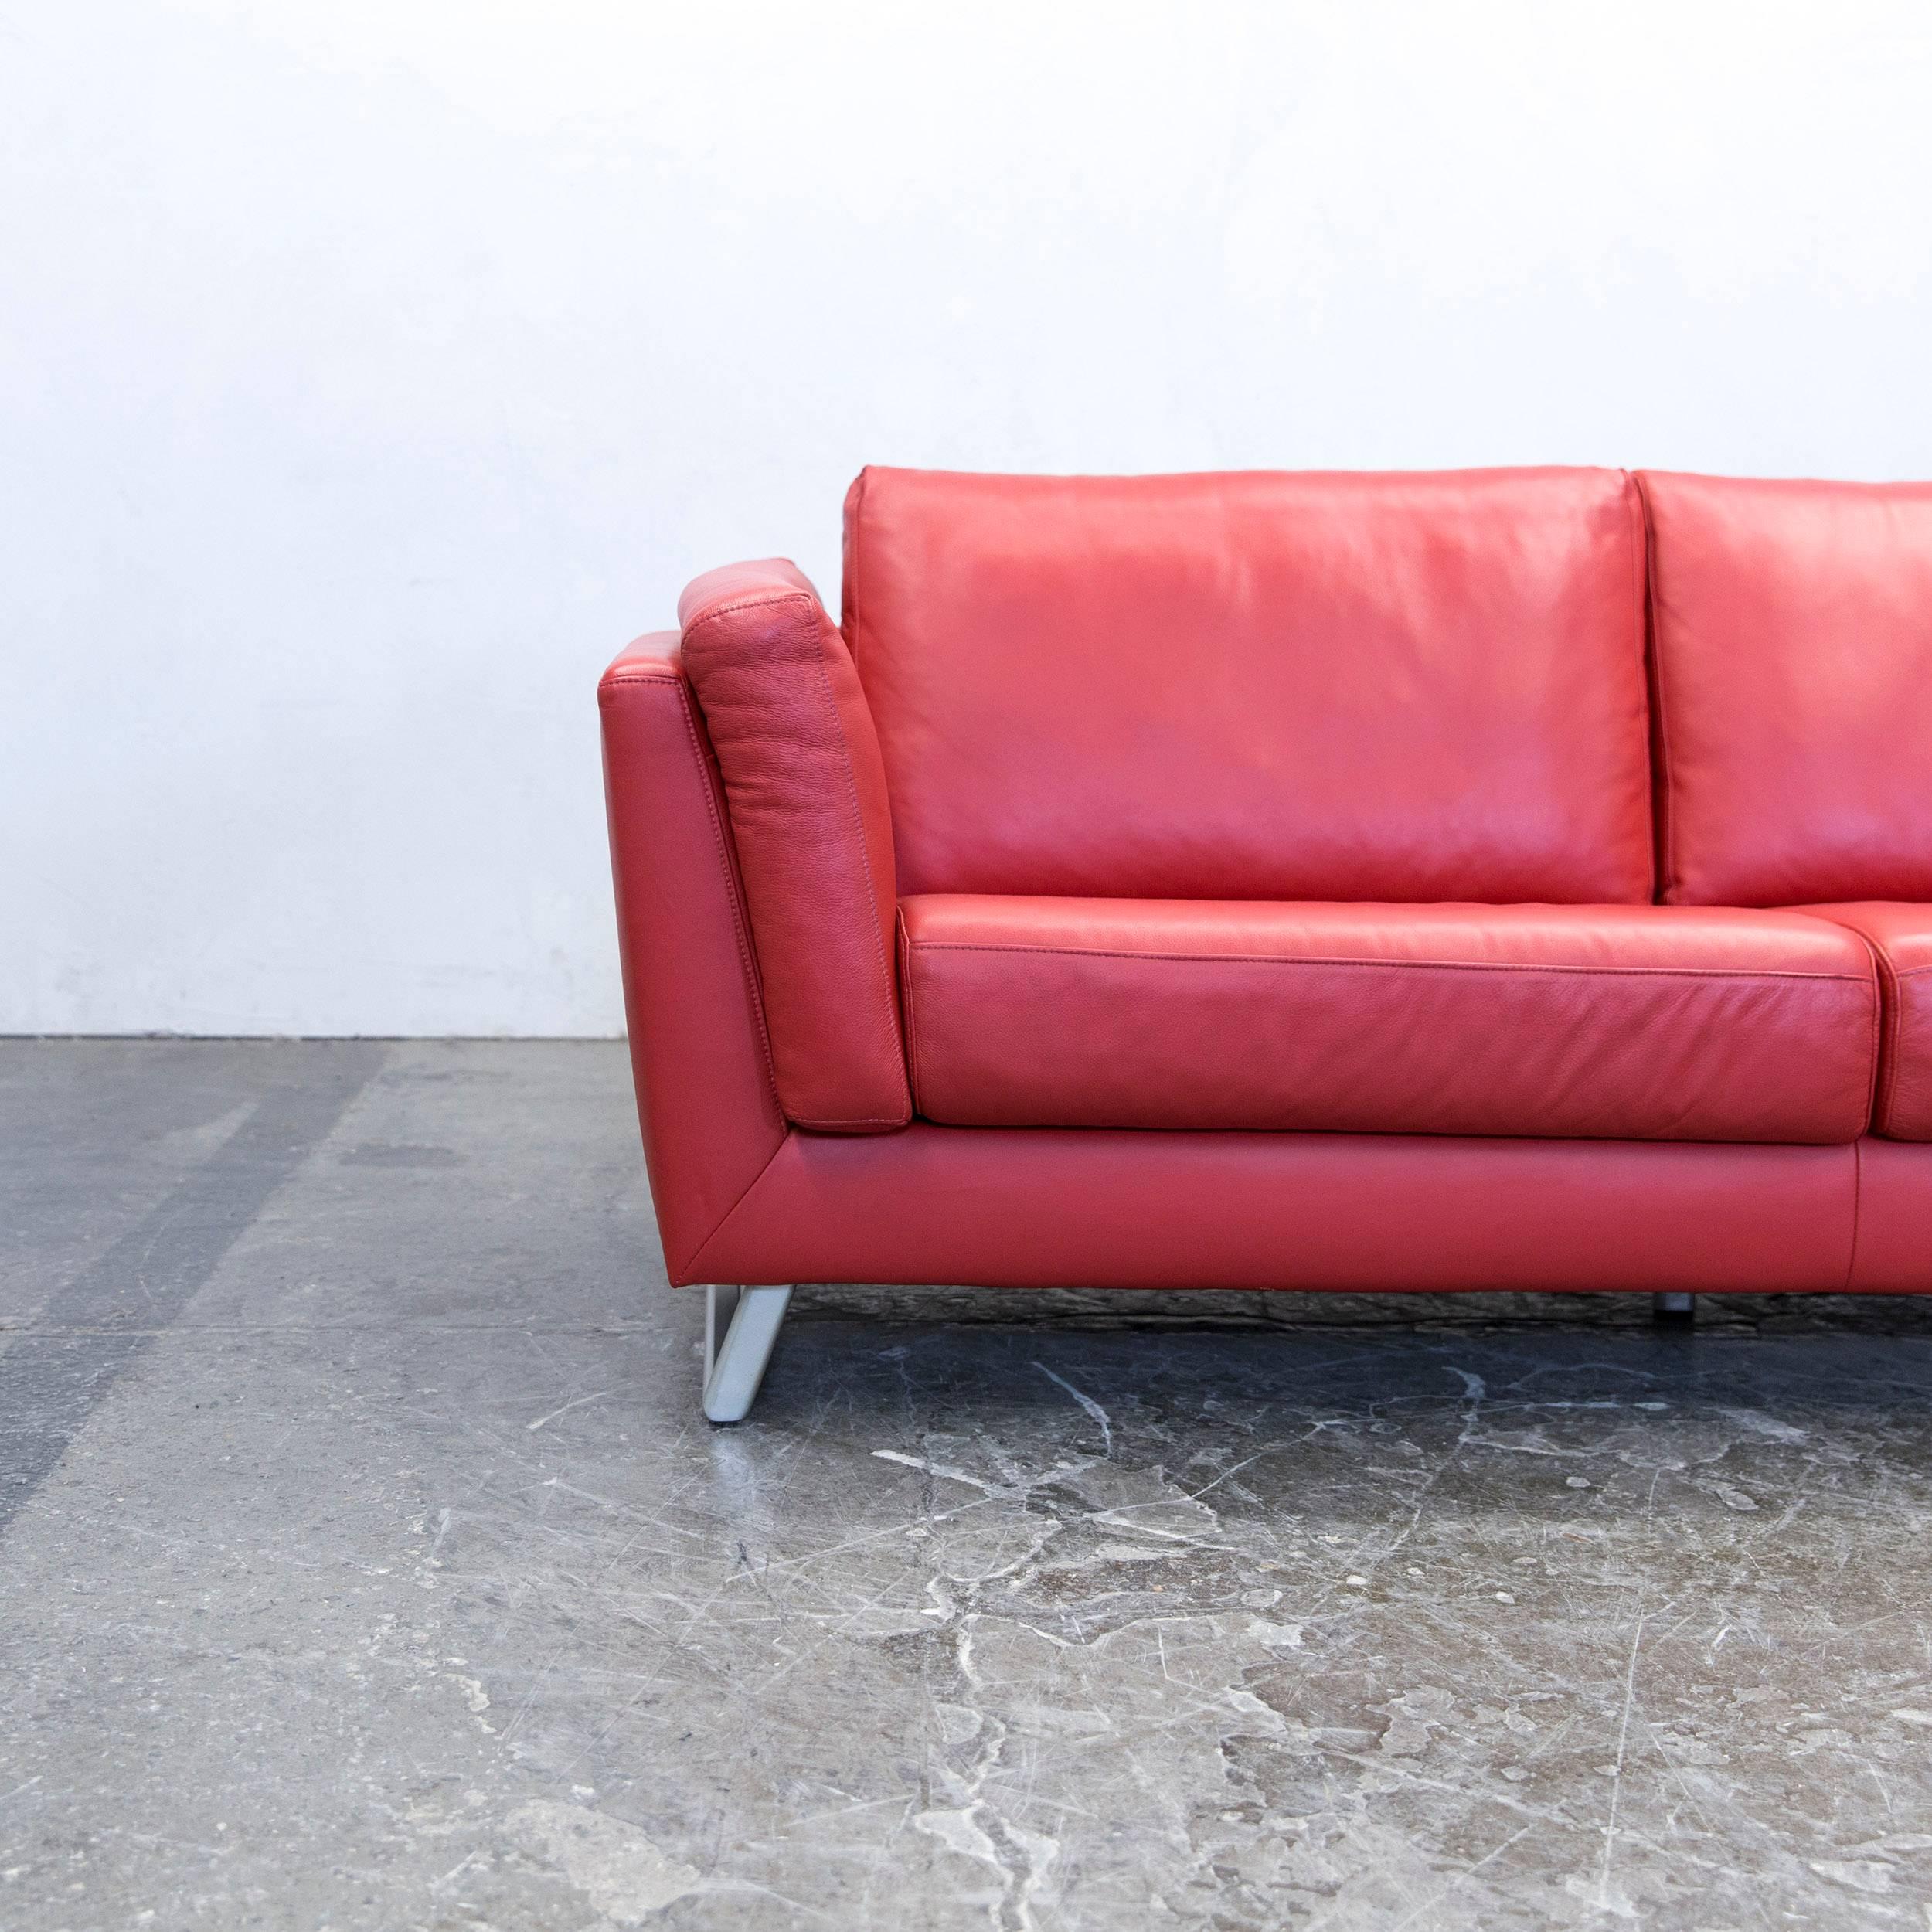 Red colored designer leather sofa, in a minimalistic and modern design, made for pure comfort.